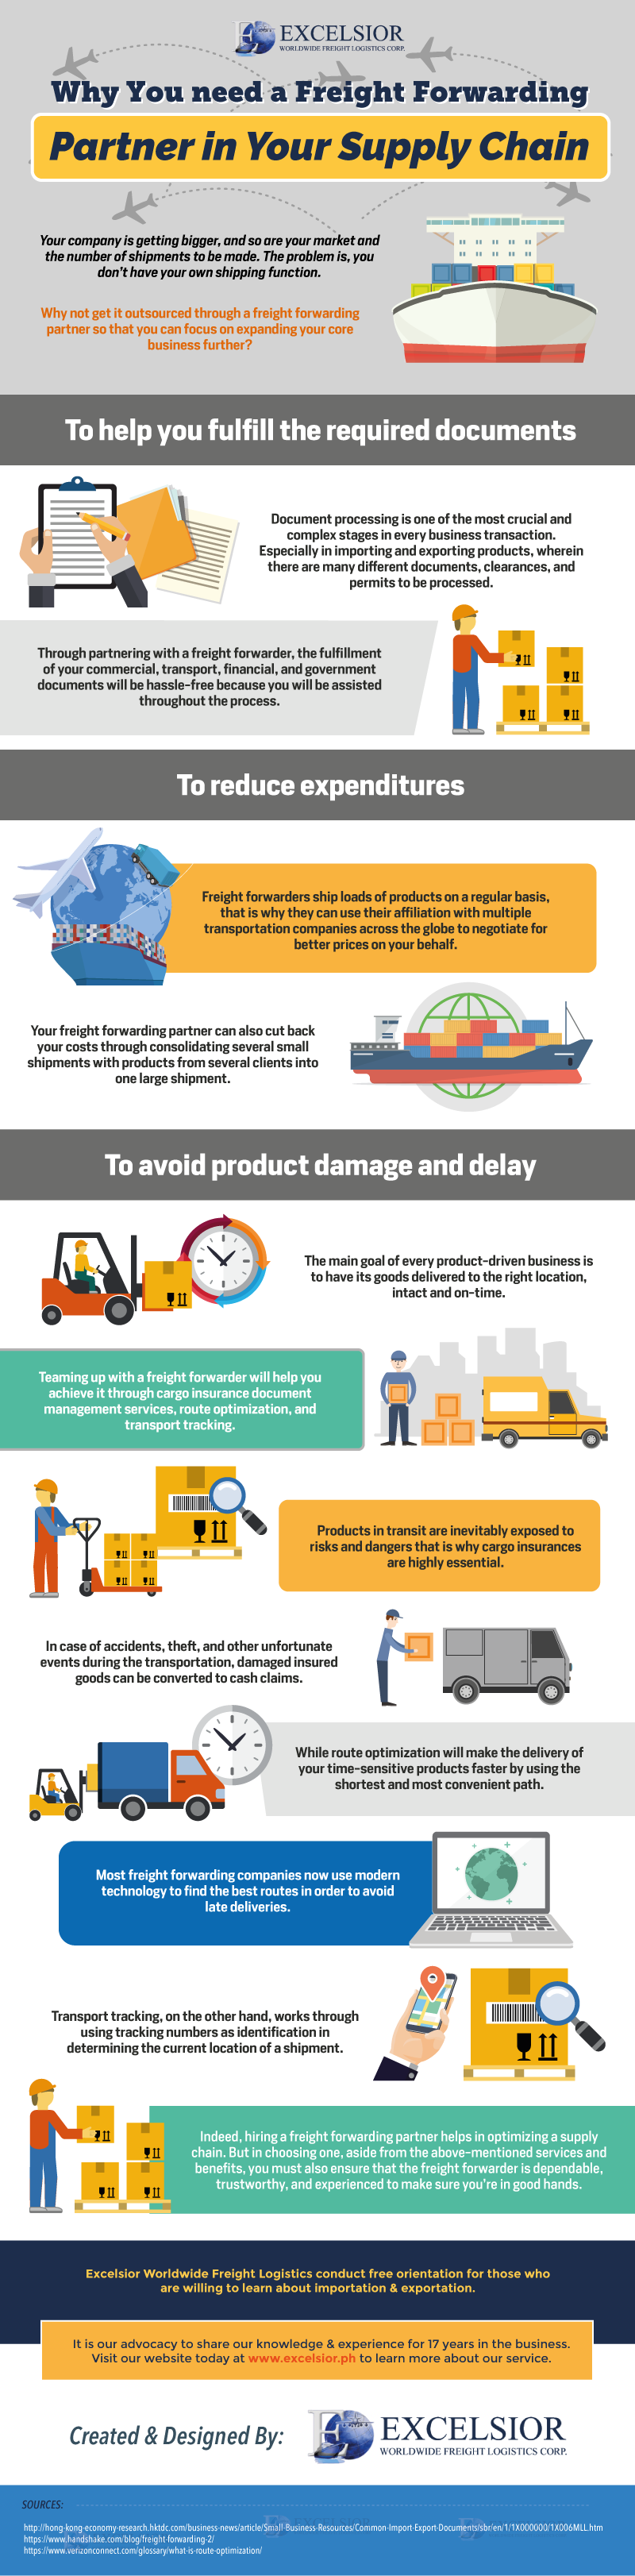 The Benefits of Working with a Specialist Freight Forwarding Partner [Infographic]